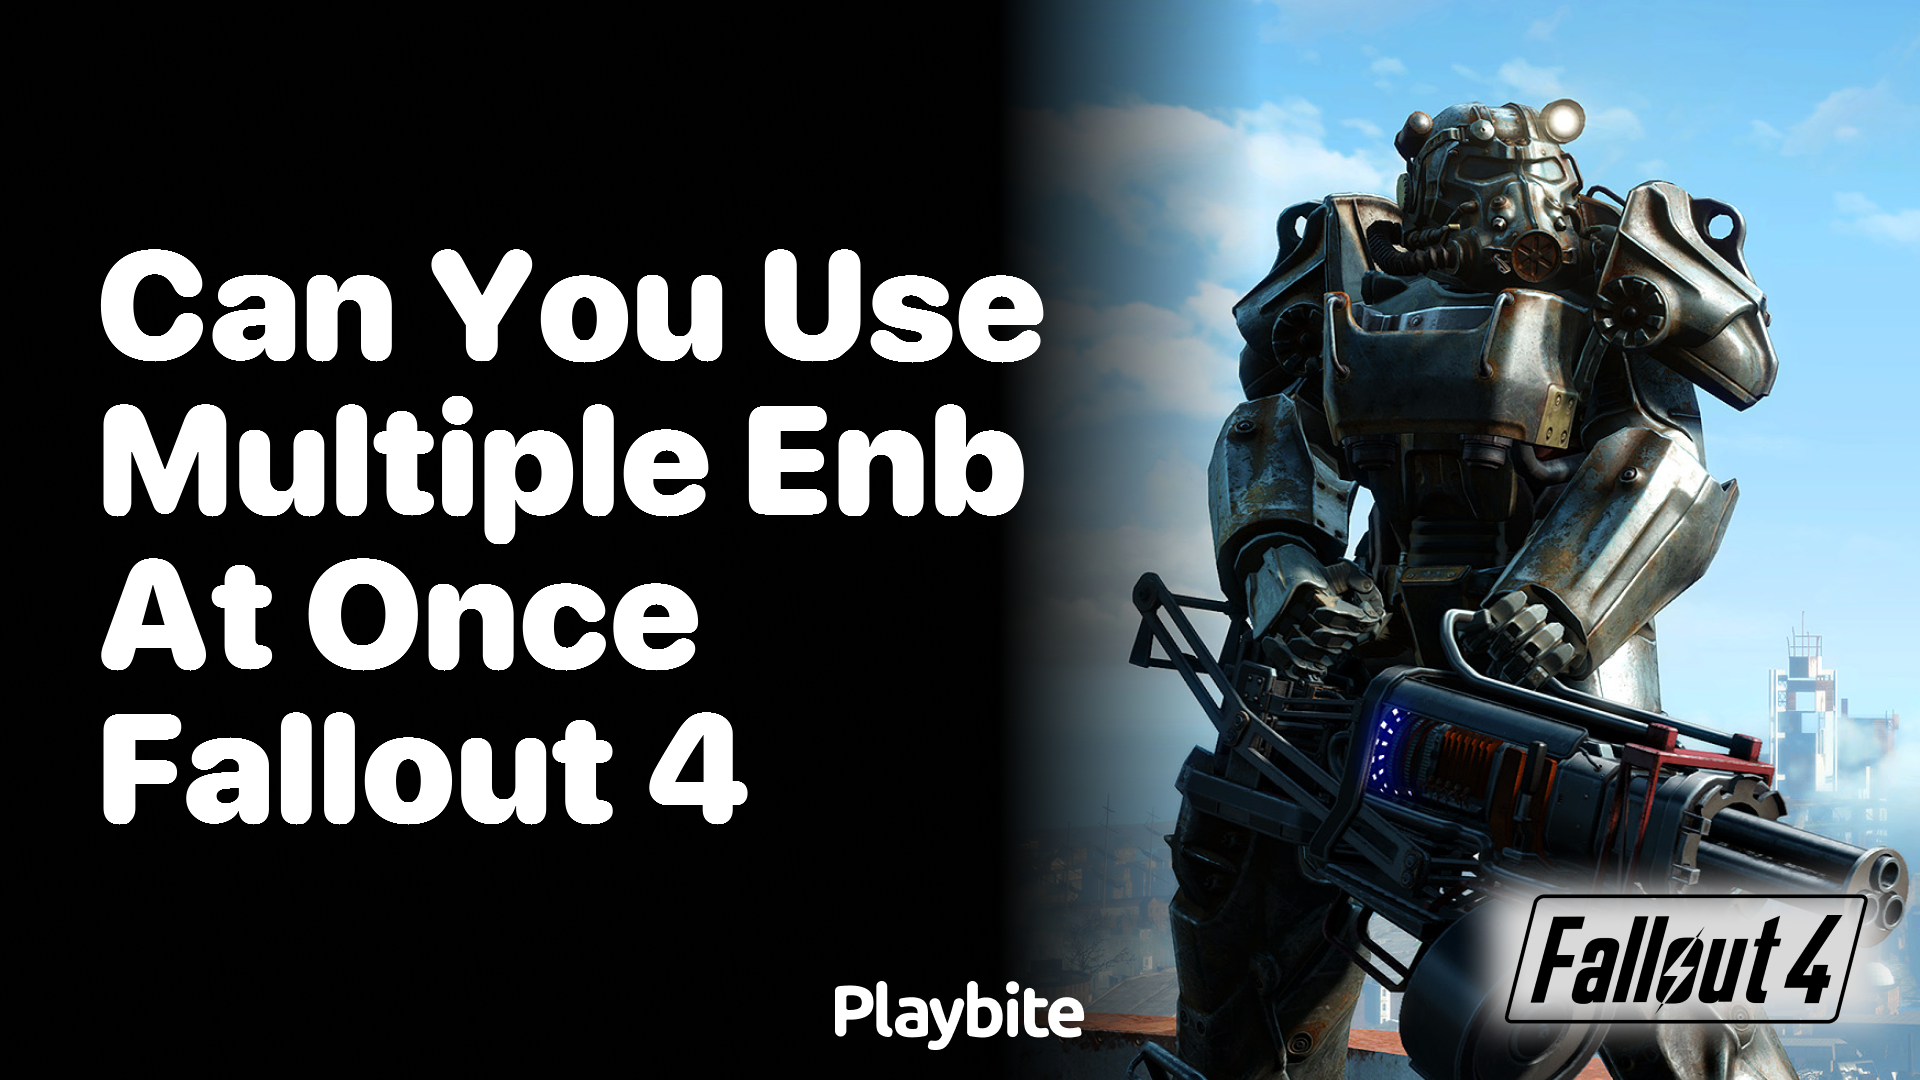 Can you use multiple ENBs at once in Fallout 4?